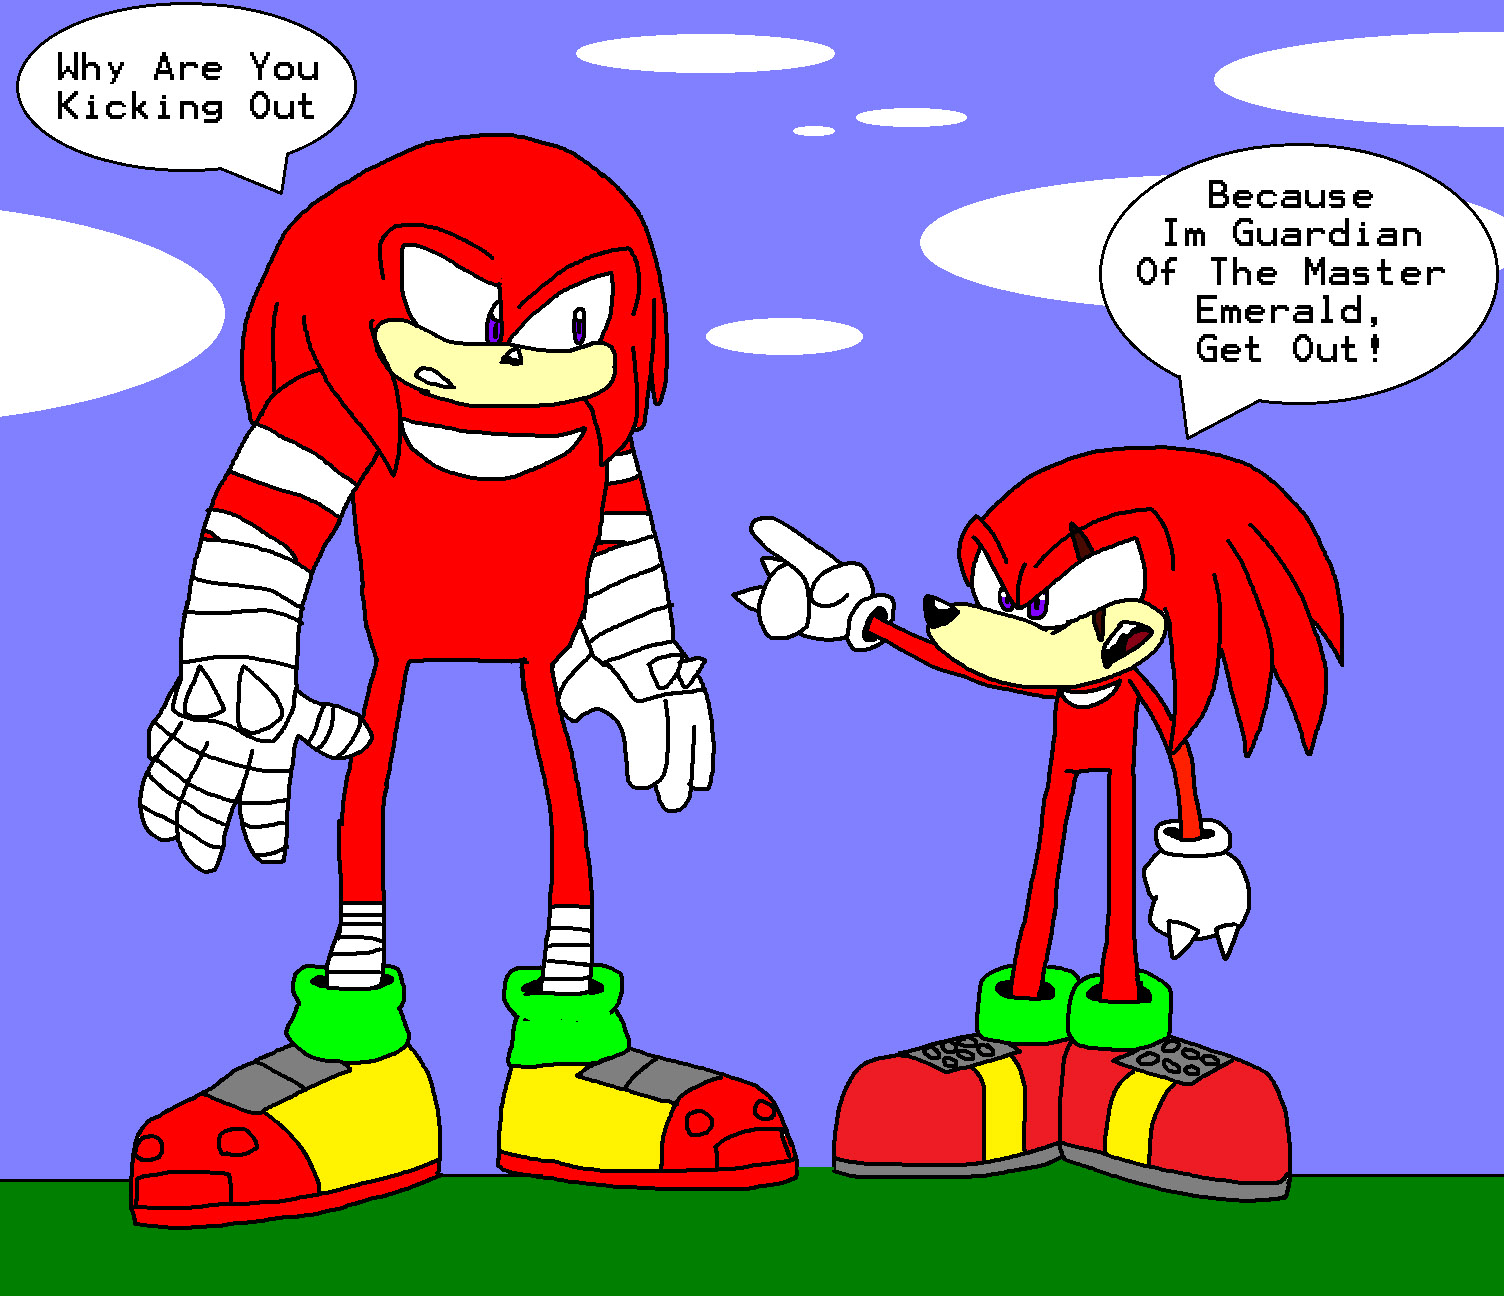 Classic Sonic and knuckles speed simulator by angry9guy on DeviantArt